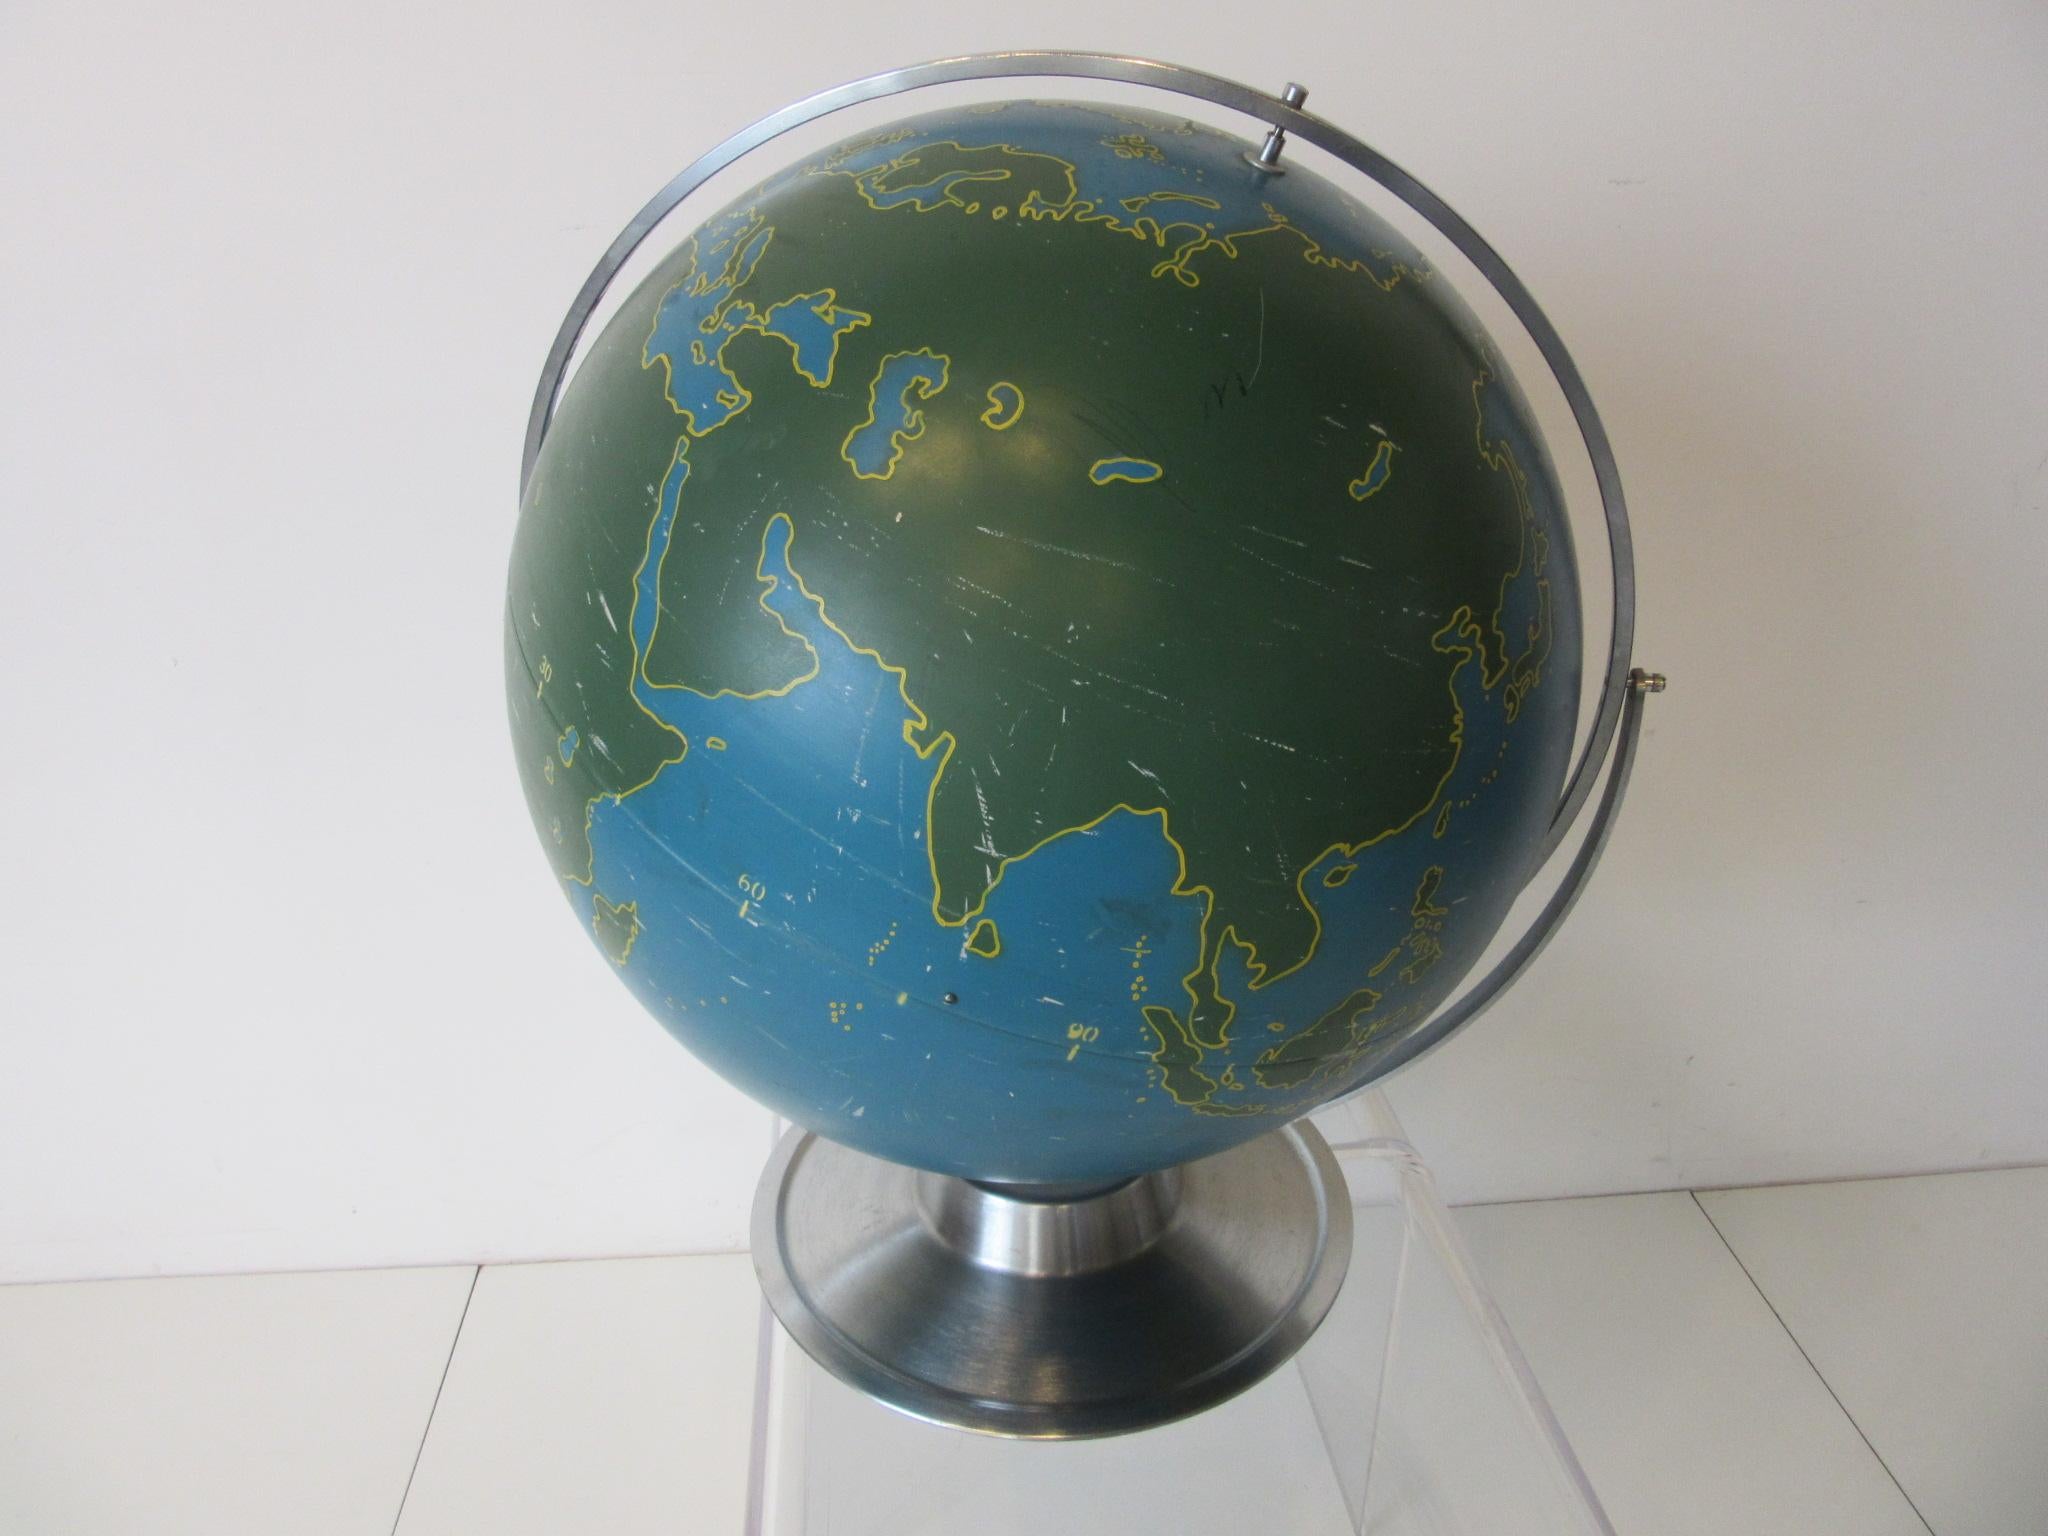 A metal rotating globe with painted countries, bodies of water, latitude and longitude numbers used for aviation and military navigational training with brushed stainless steel base and ring. This large very well crafted hollow globe is the tops for